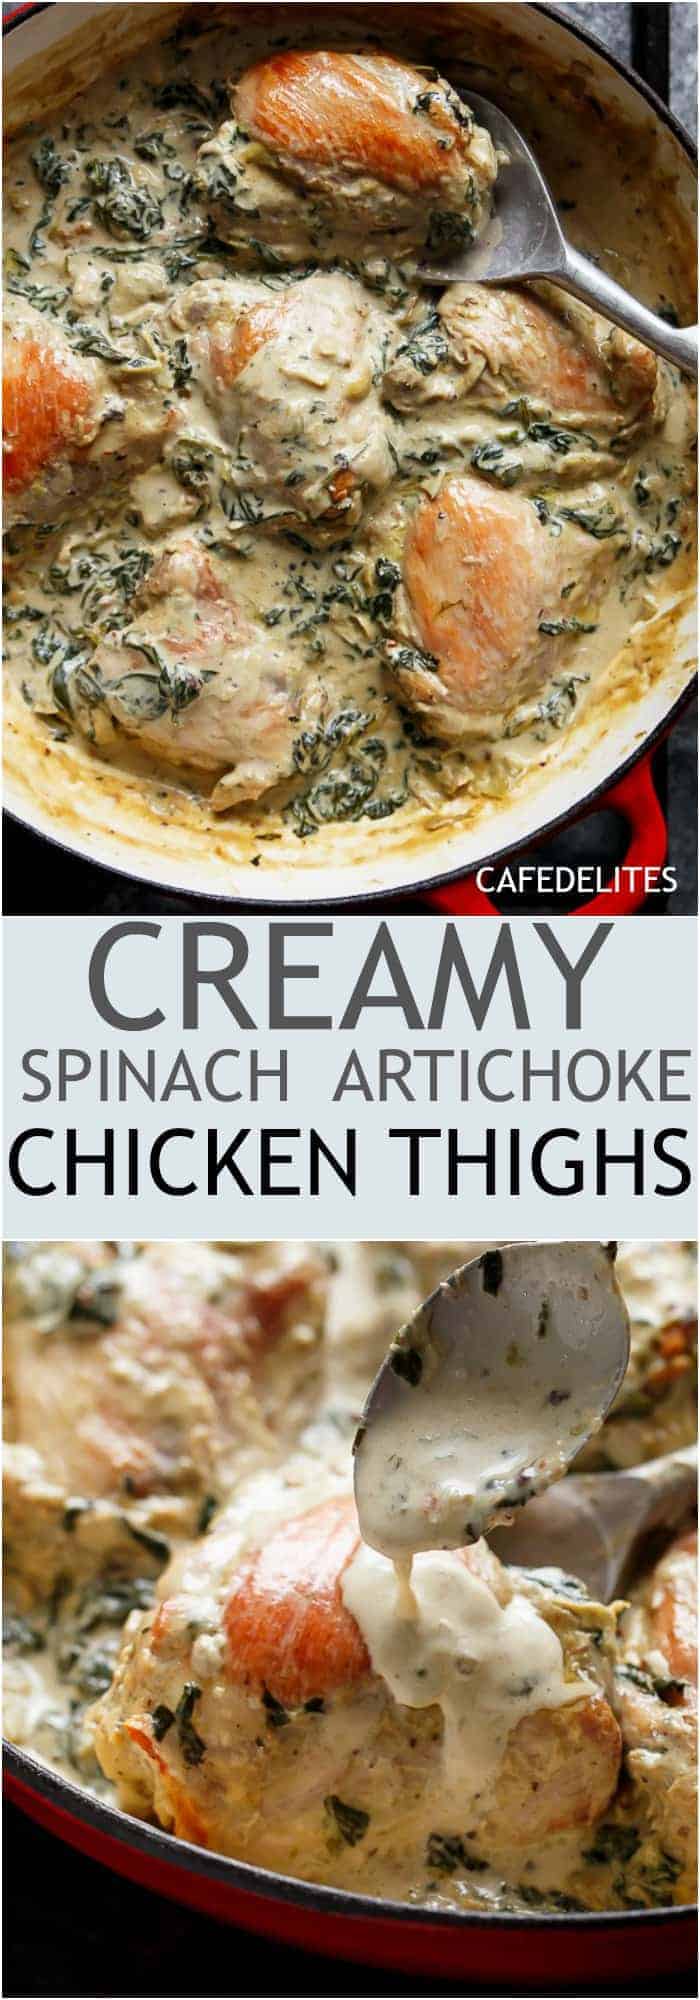 Creamy Spinach Artichoke Chicken Thighs in one skillet! Low fat AND low carb, filled with fresh spinach, artichokes, parmesan cheese and a hint of garlic! | https://cafedelites.com